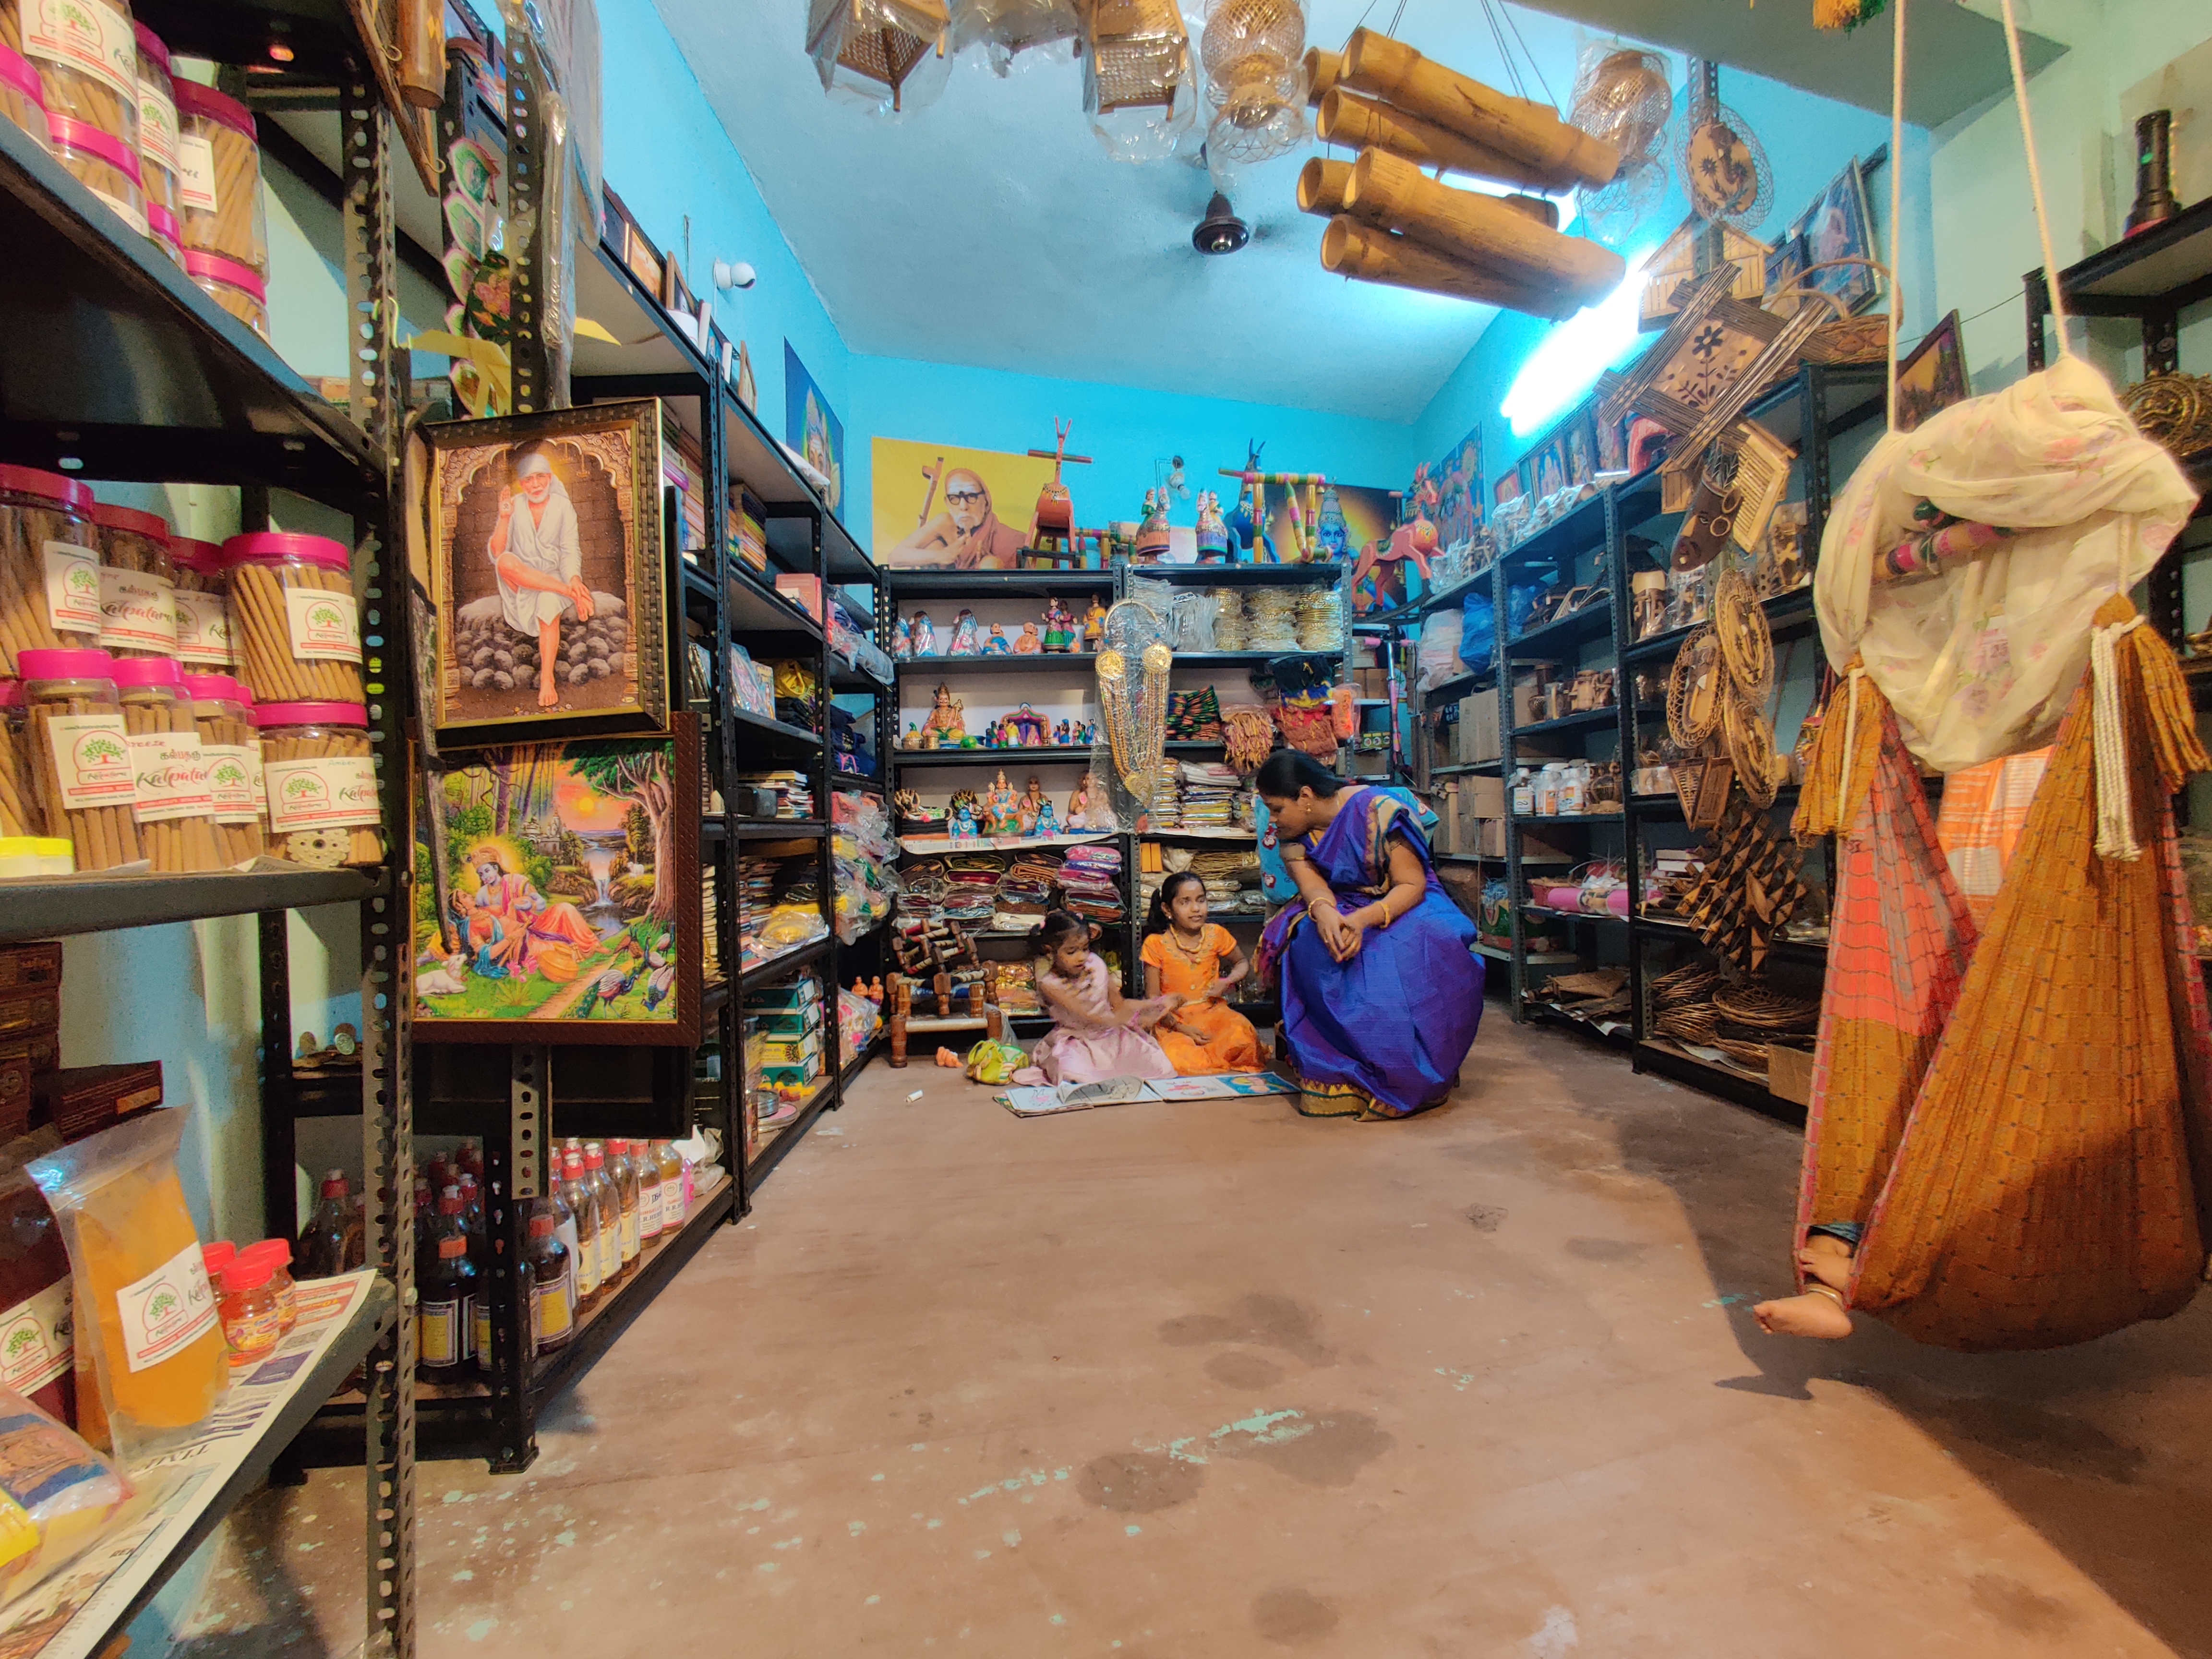 Kalpataru, a religious boutique where you can find handicrafts, bamboo bottles, handmade religious statues, customized incense sticks and fragrances, organic soaps, and more.